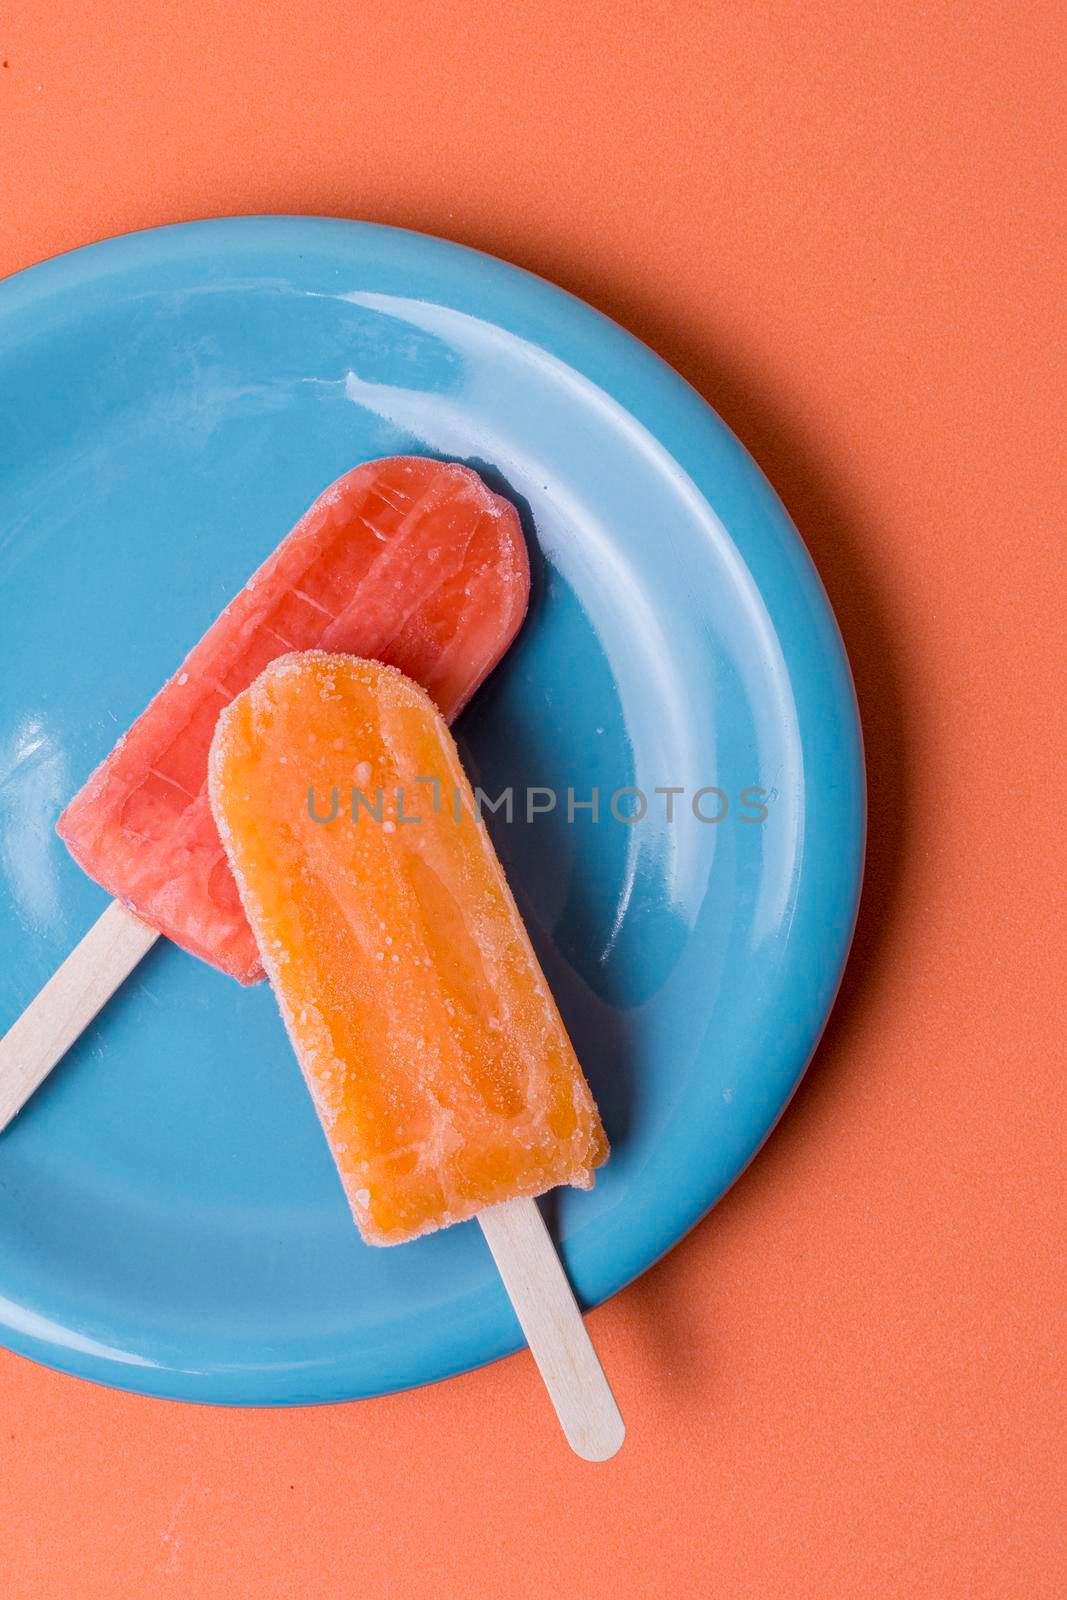 homemade popsicle ice cream different flavours. High quality photo by Zahard